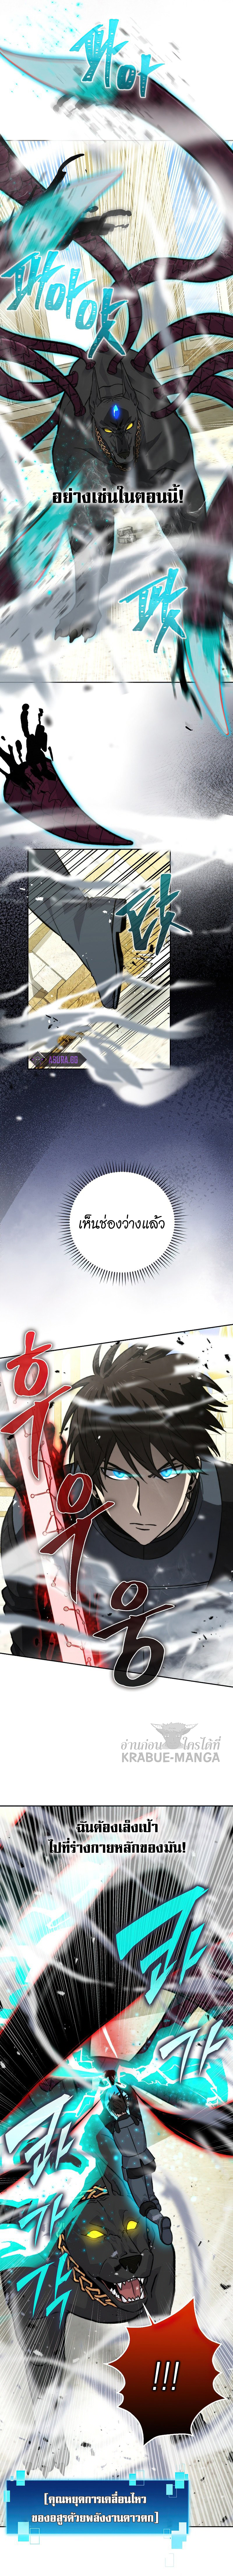 Demon Lord’s Martial Arts Ascension 24 (2)